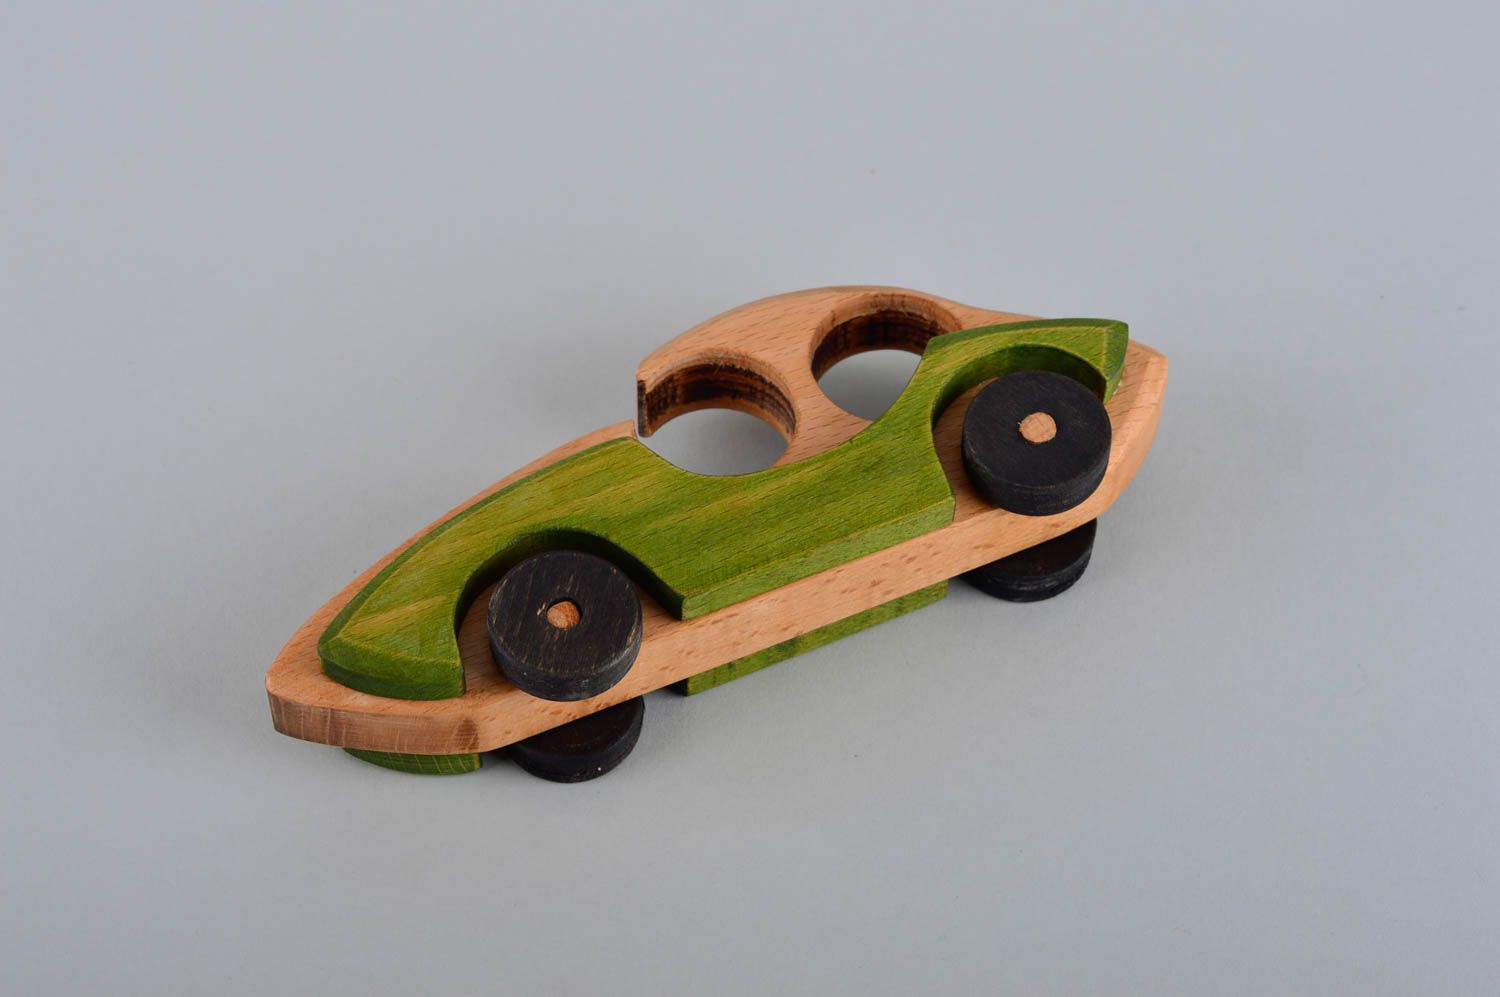 Wooden toy unusual toy for kids designer toy gift ideas nursery decor photo 5